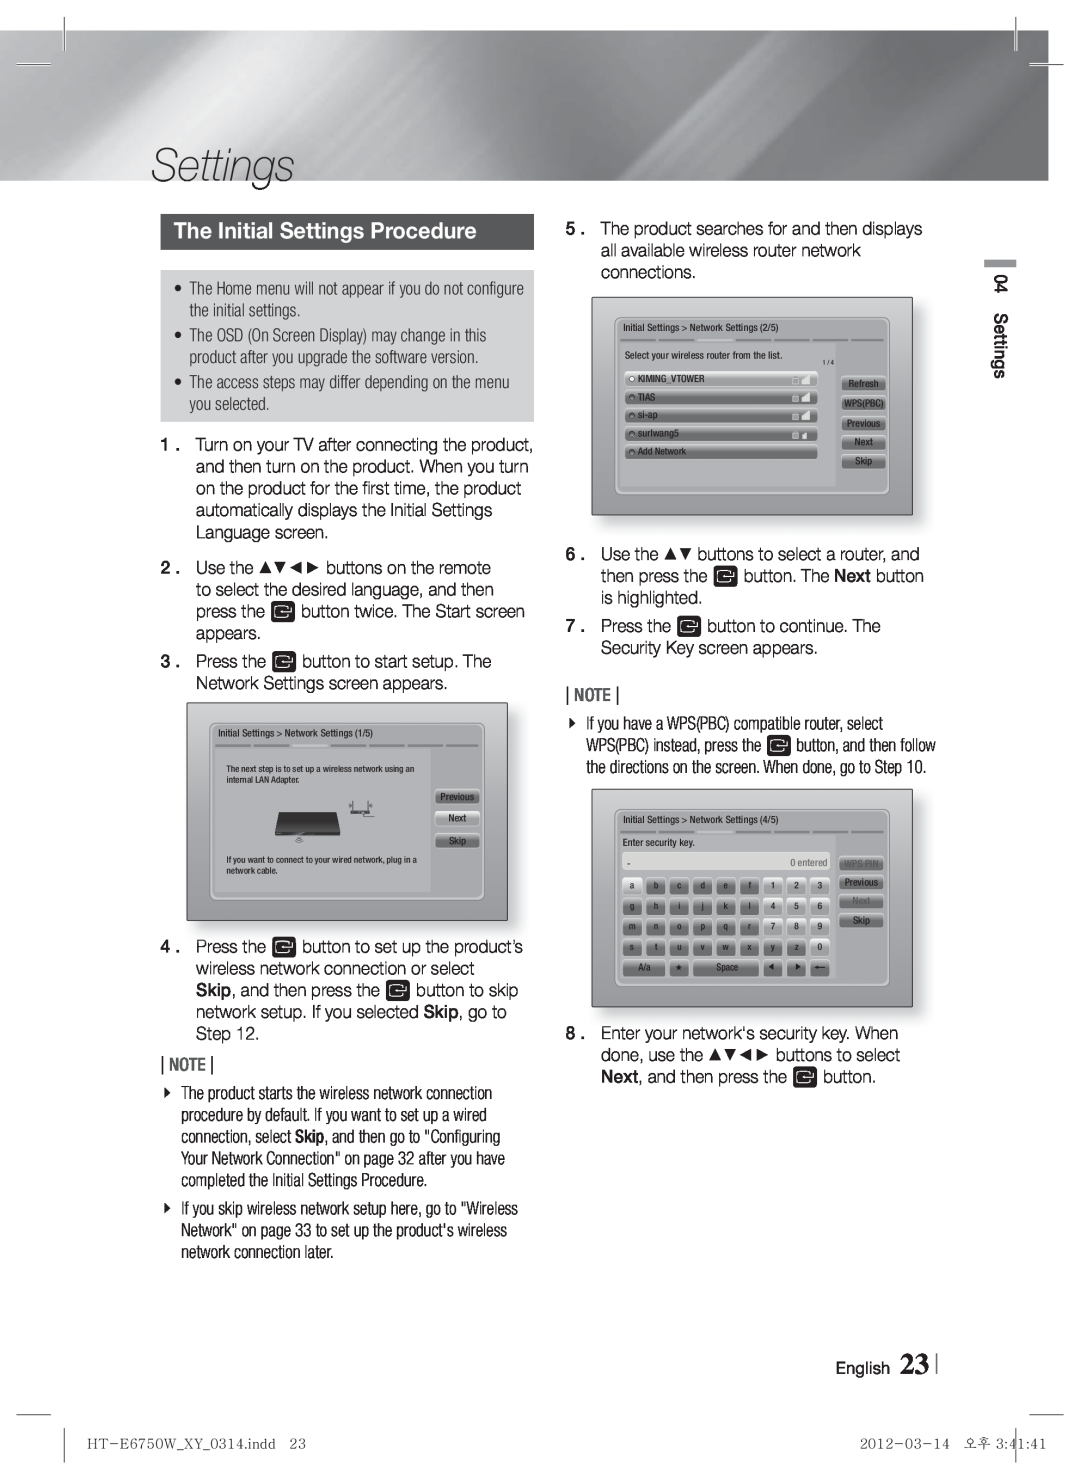 Samsung HT-E6750W user manual The Initial Settings Procedure, Note 